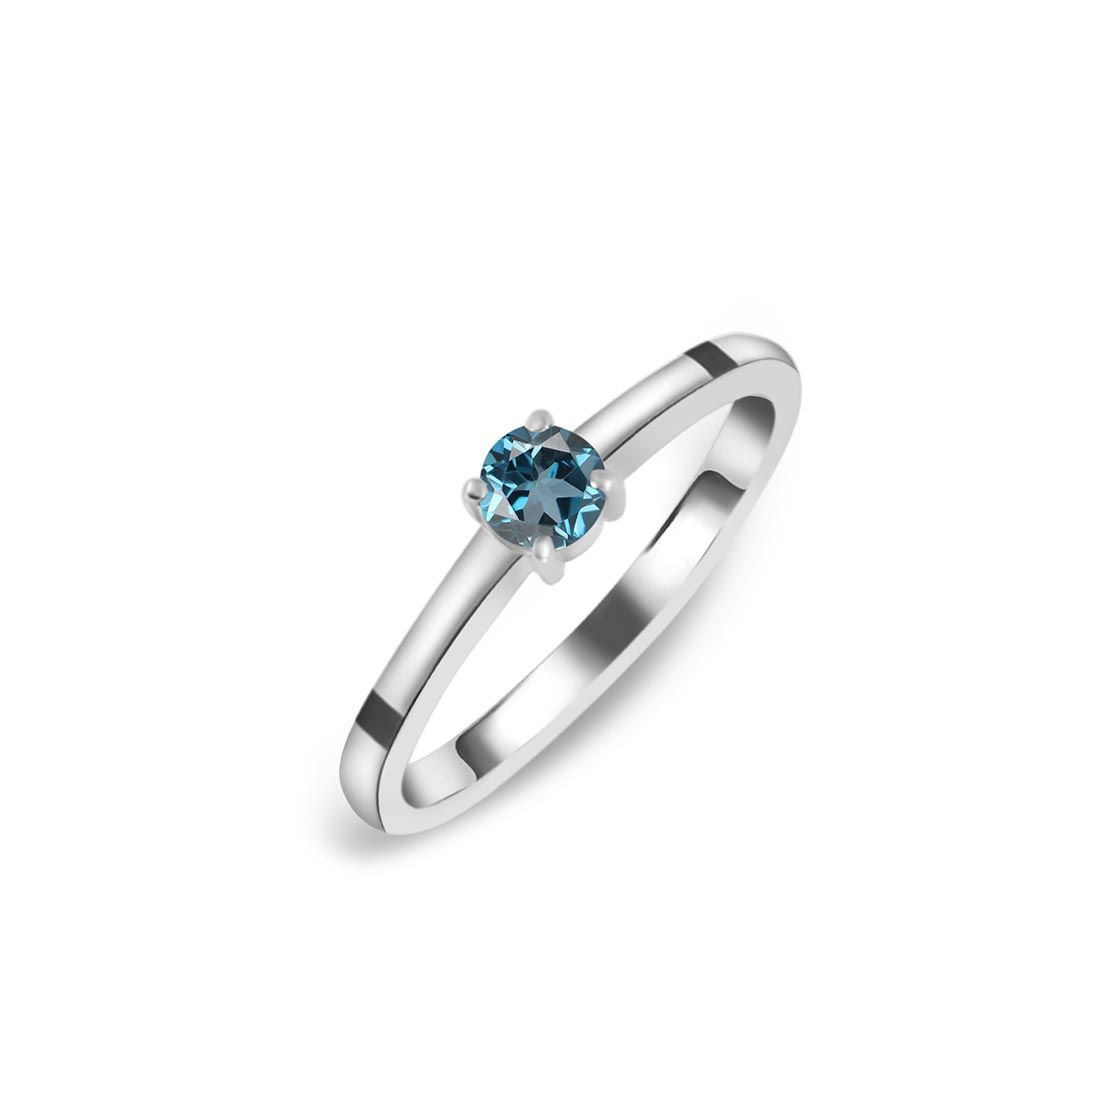 We Provide An Extensive Choice Of Designs In Our London Blue Topaz Ring